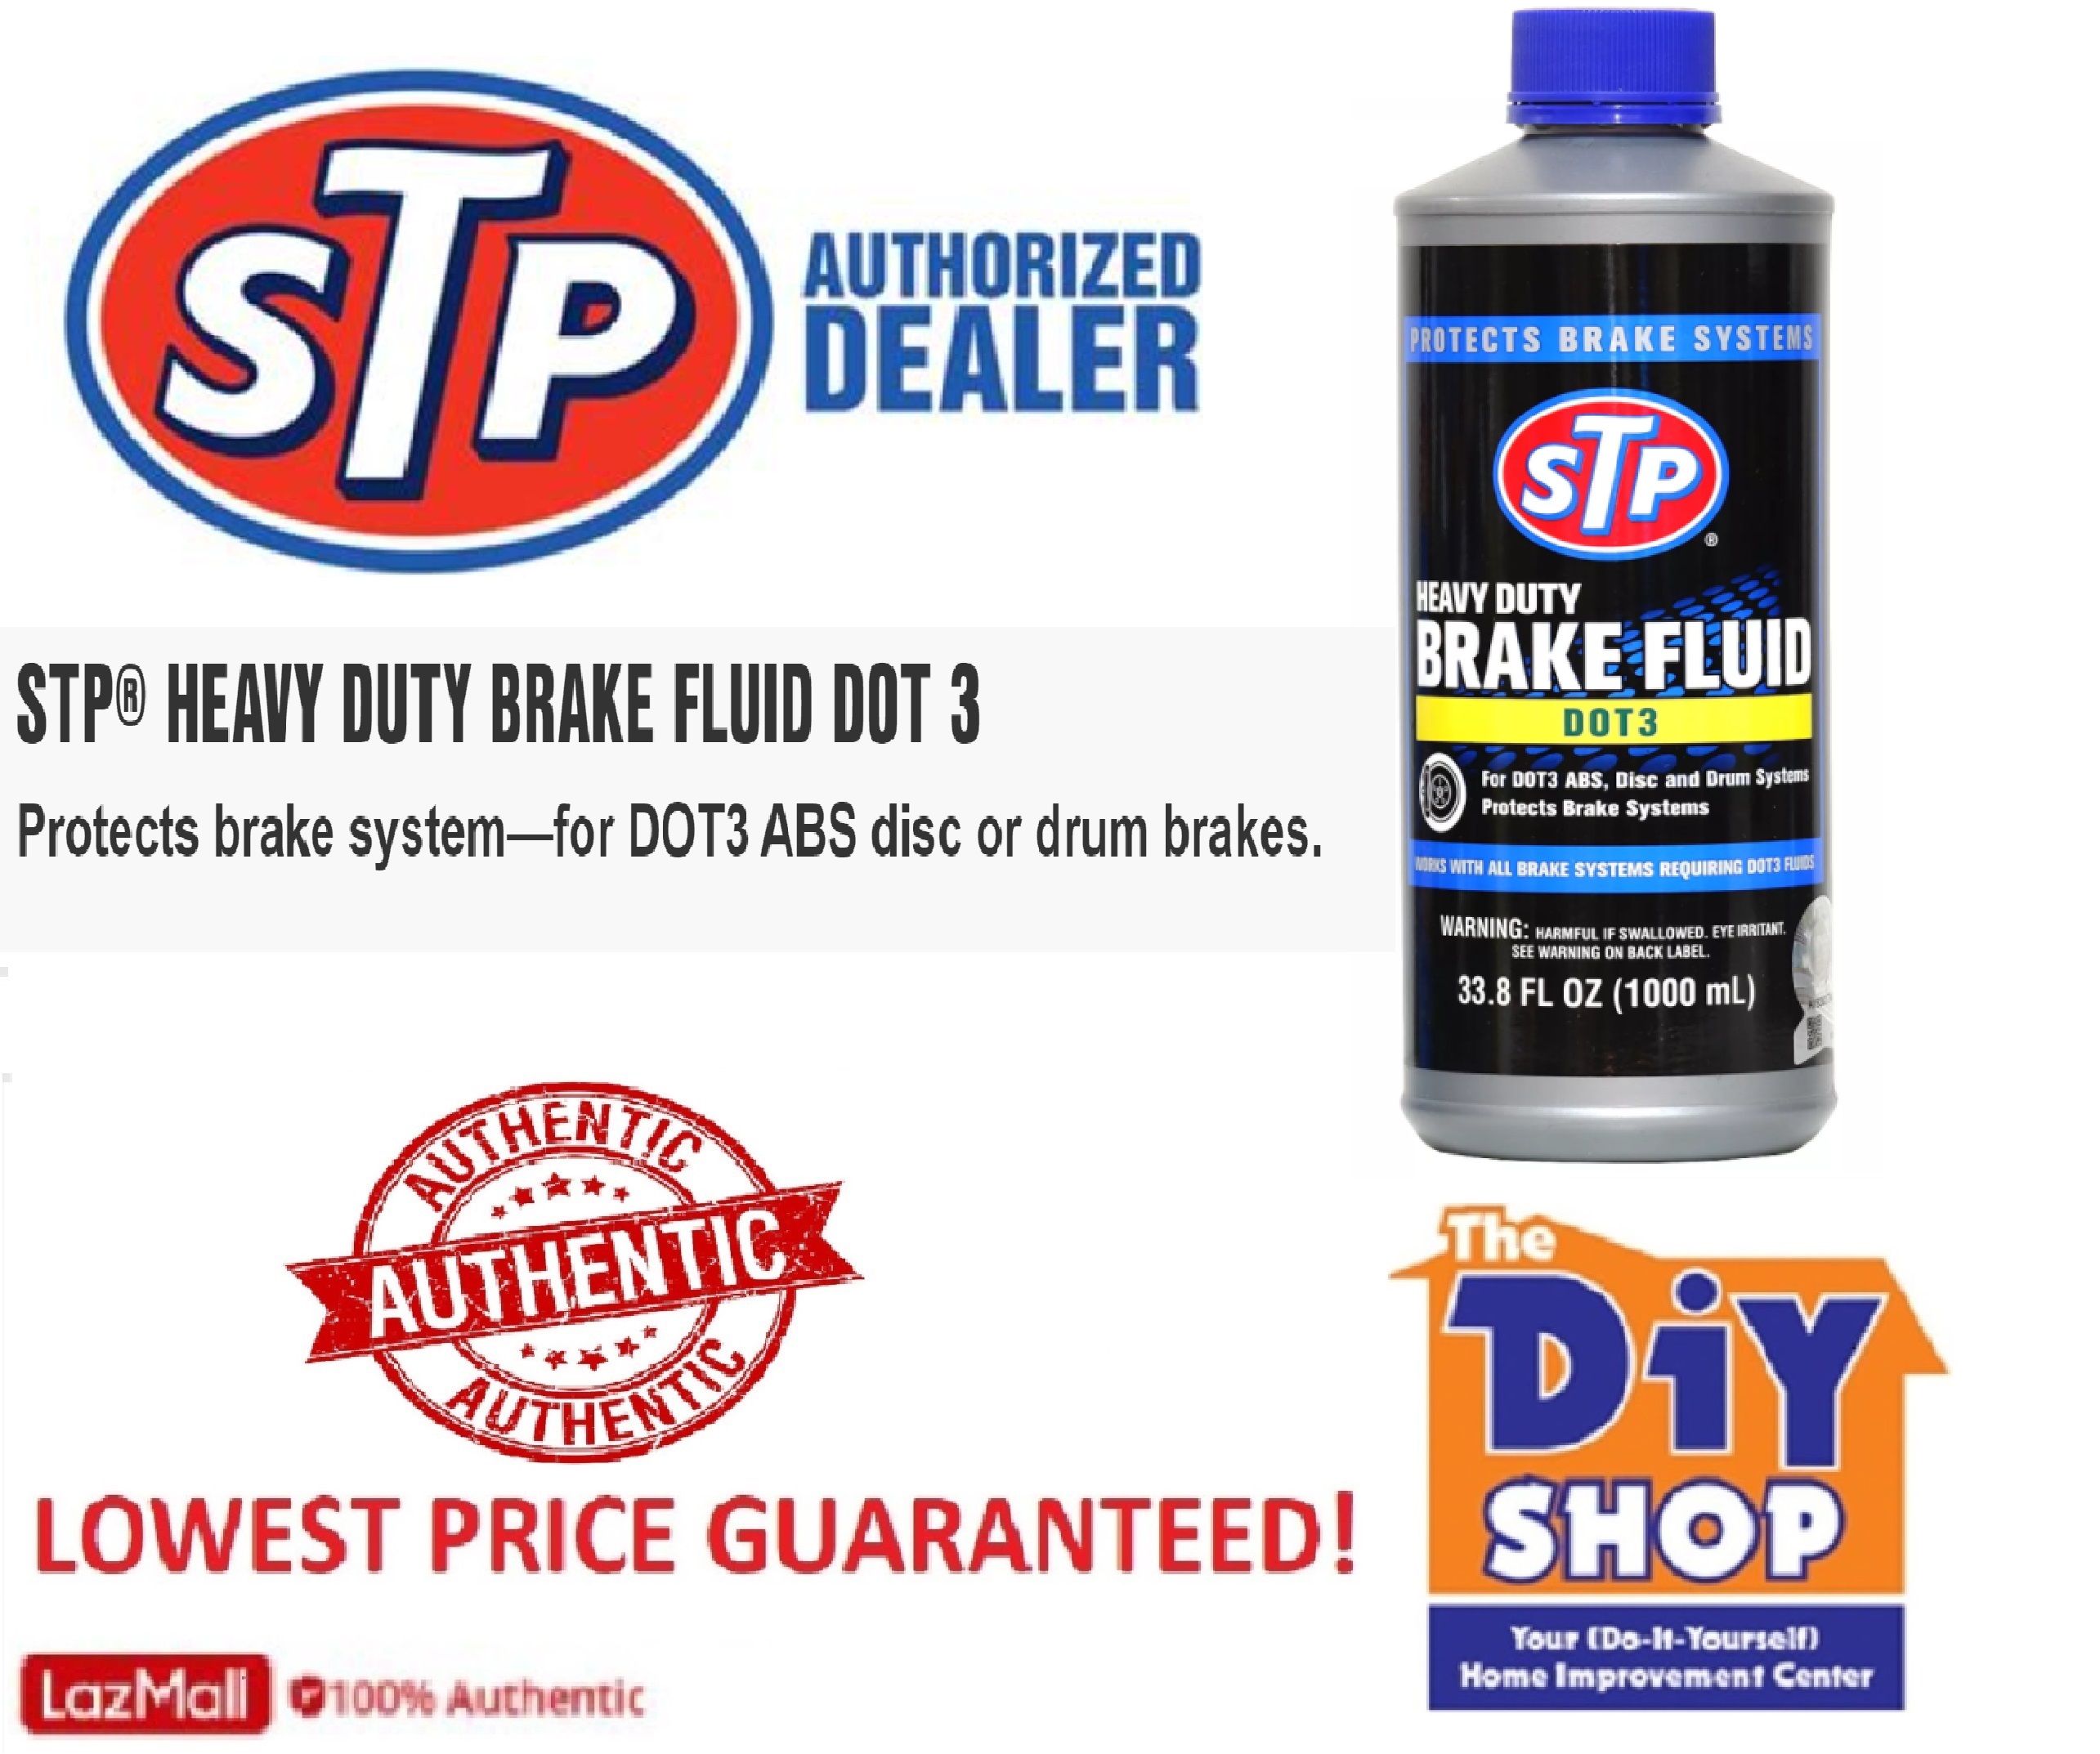 STP Synthetic Brake Fluid, Dot 4 Brake Fluid Protects Brake Systems, ABS,  Disc and Drum Systems, 12 Oz, STP